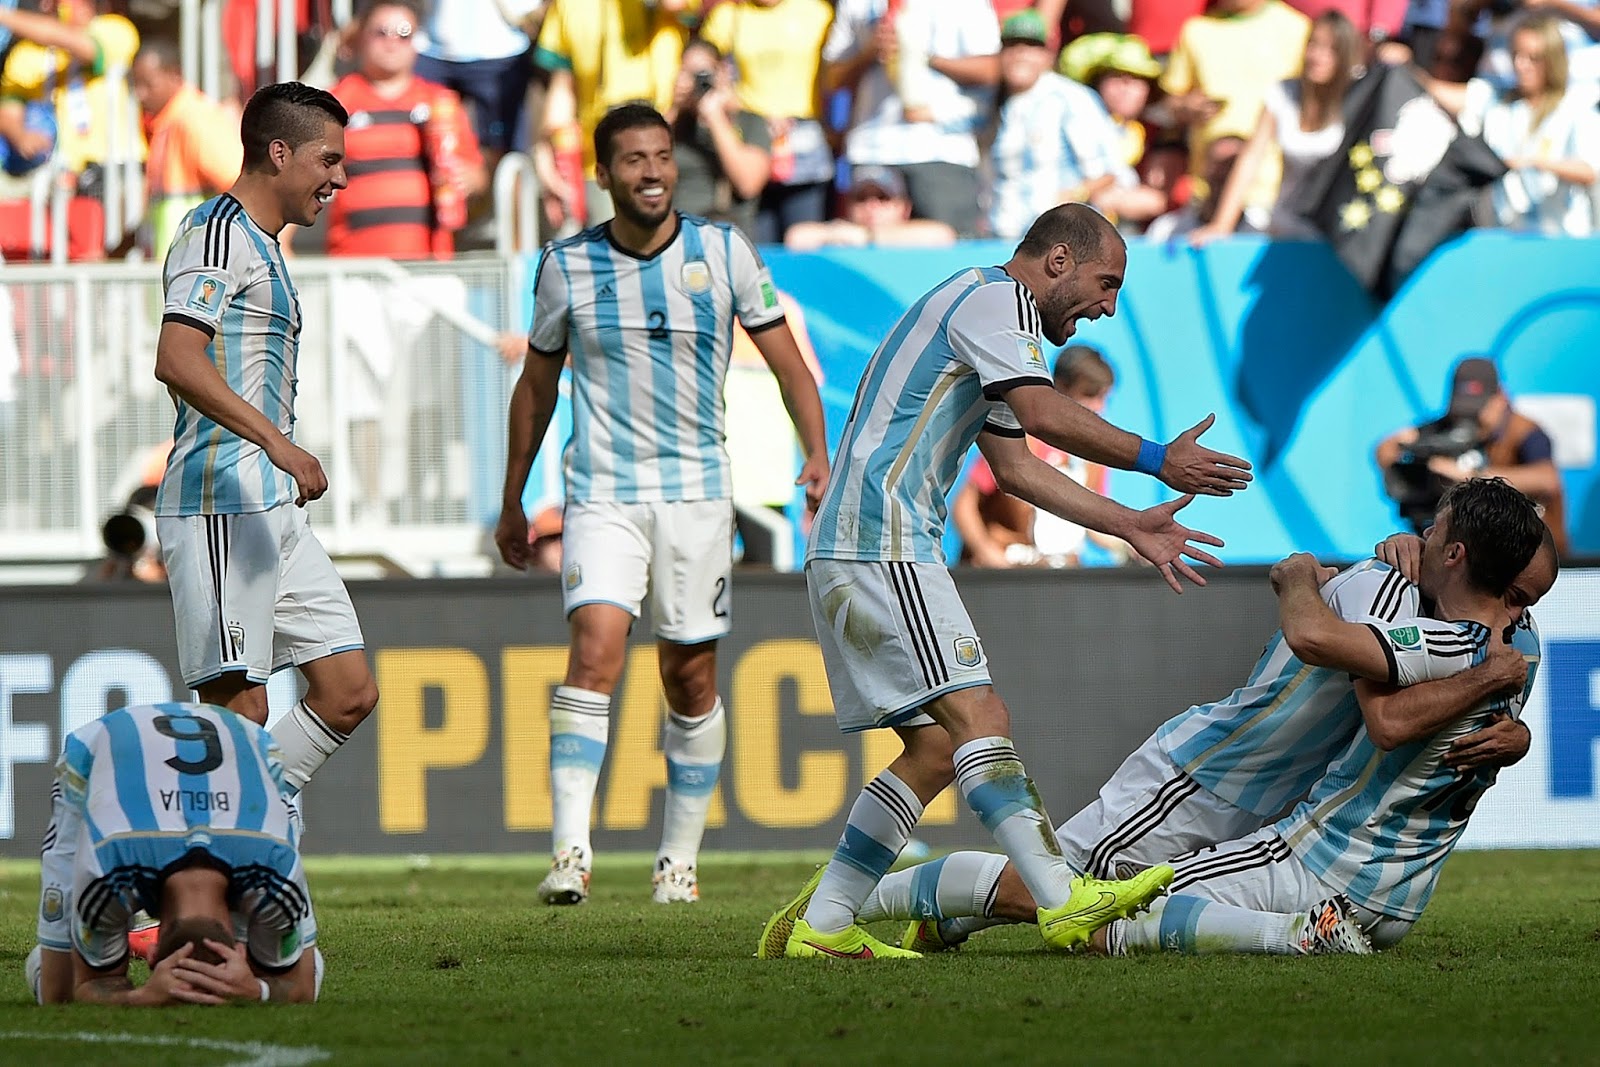 FIFA World Cup 2014: Argentina vs Belgium 60th Match in Pictures ...